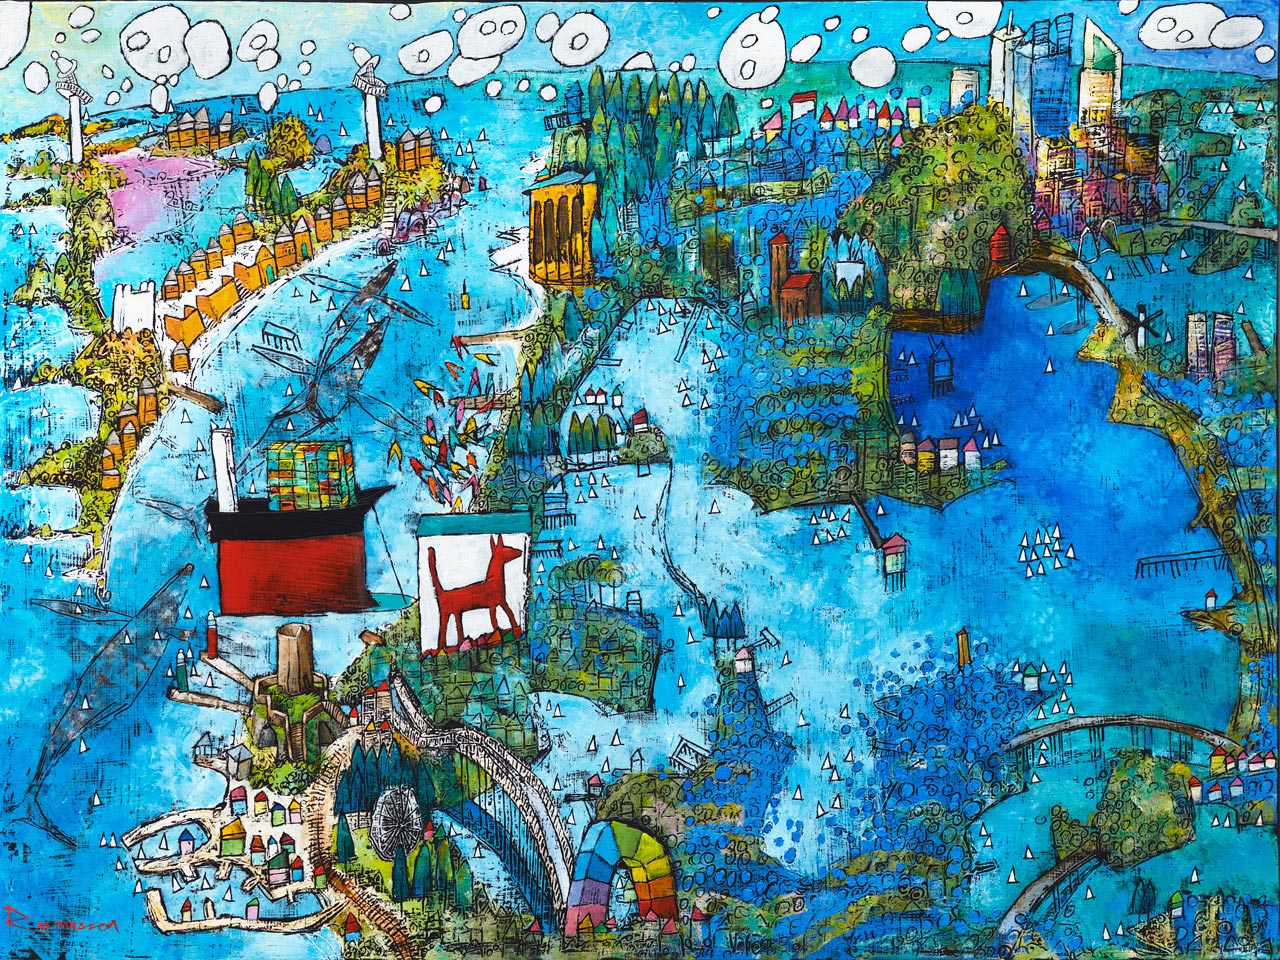 Our Happy Place - Oil Painting by Ken Rasmussen showing Fremantle, Rottnest and Perth